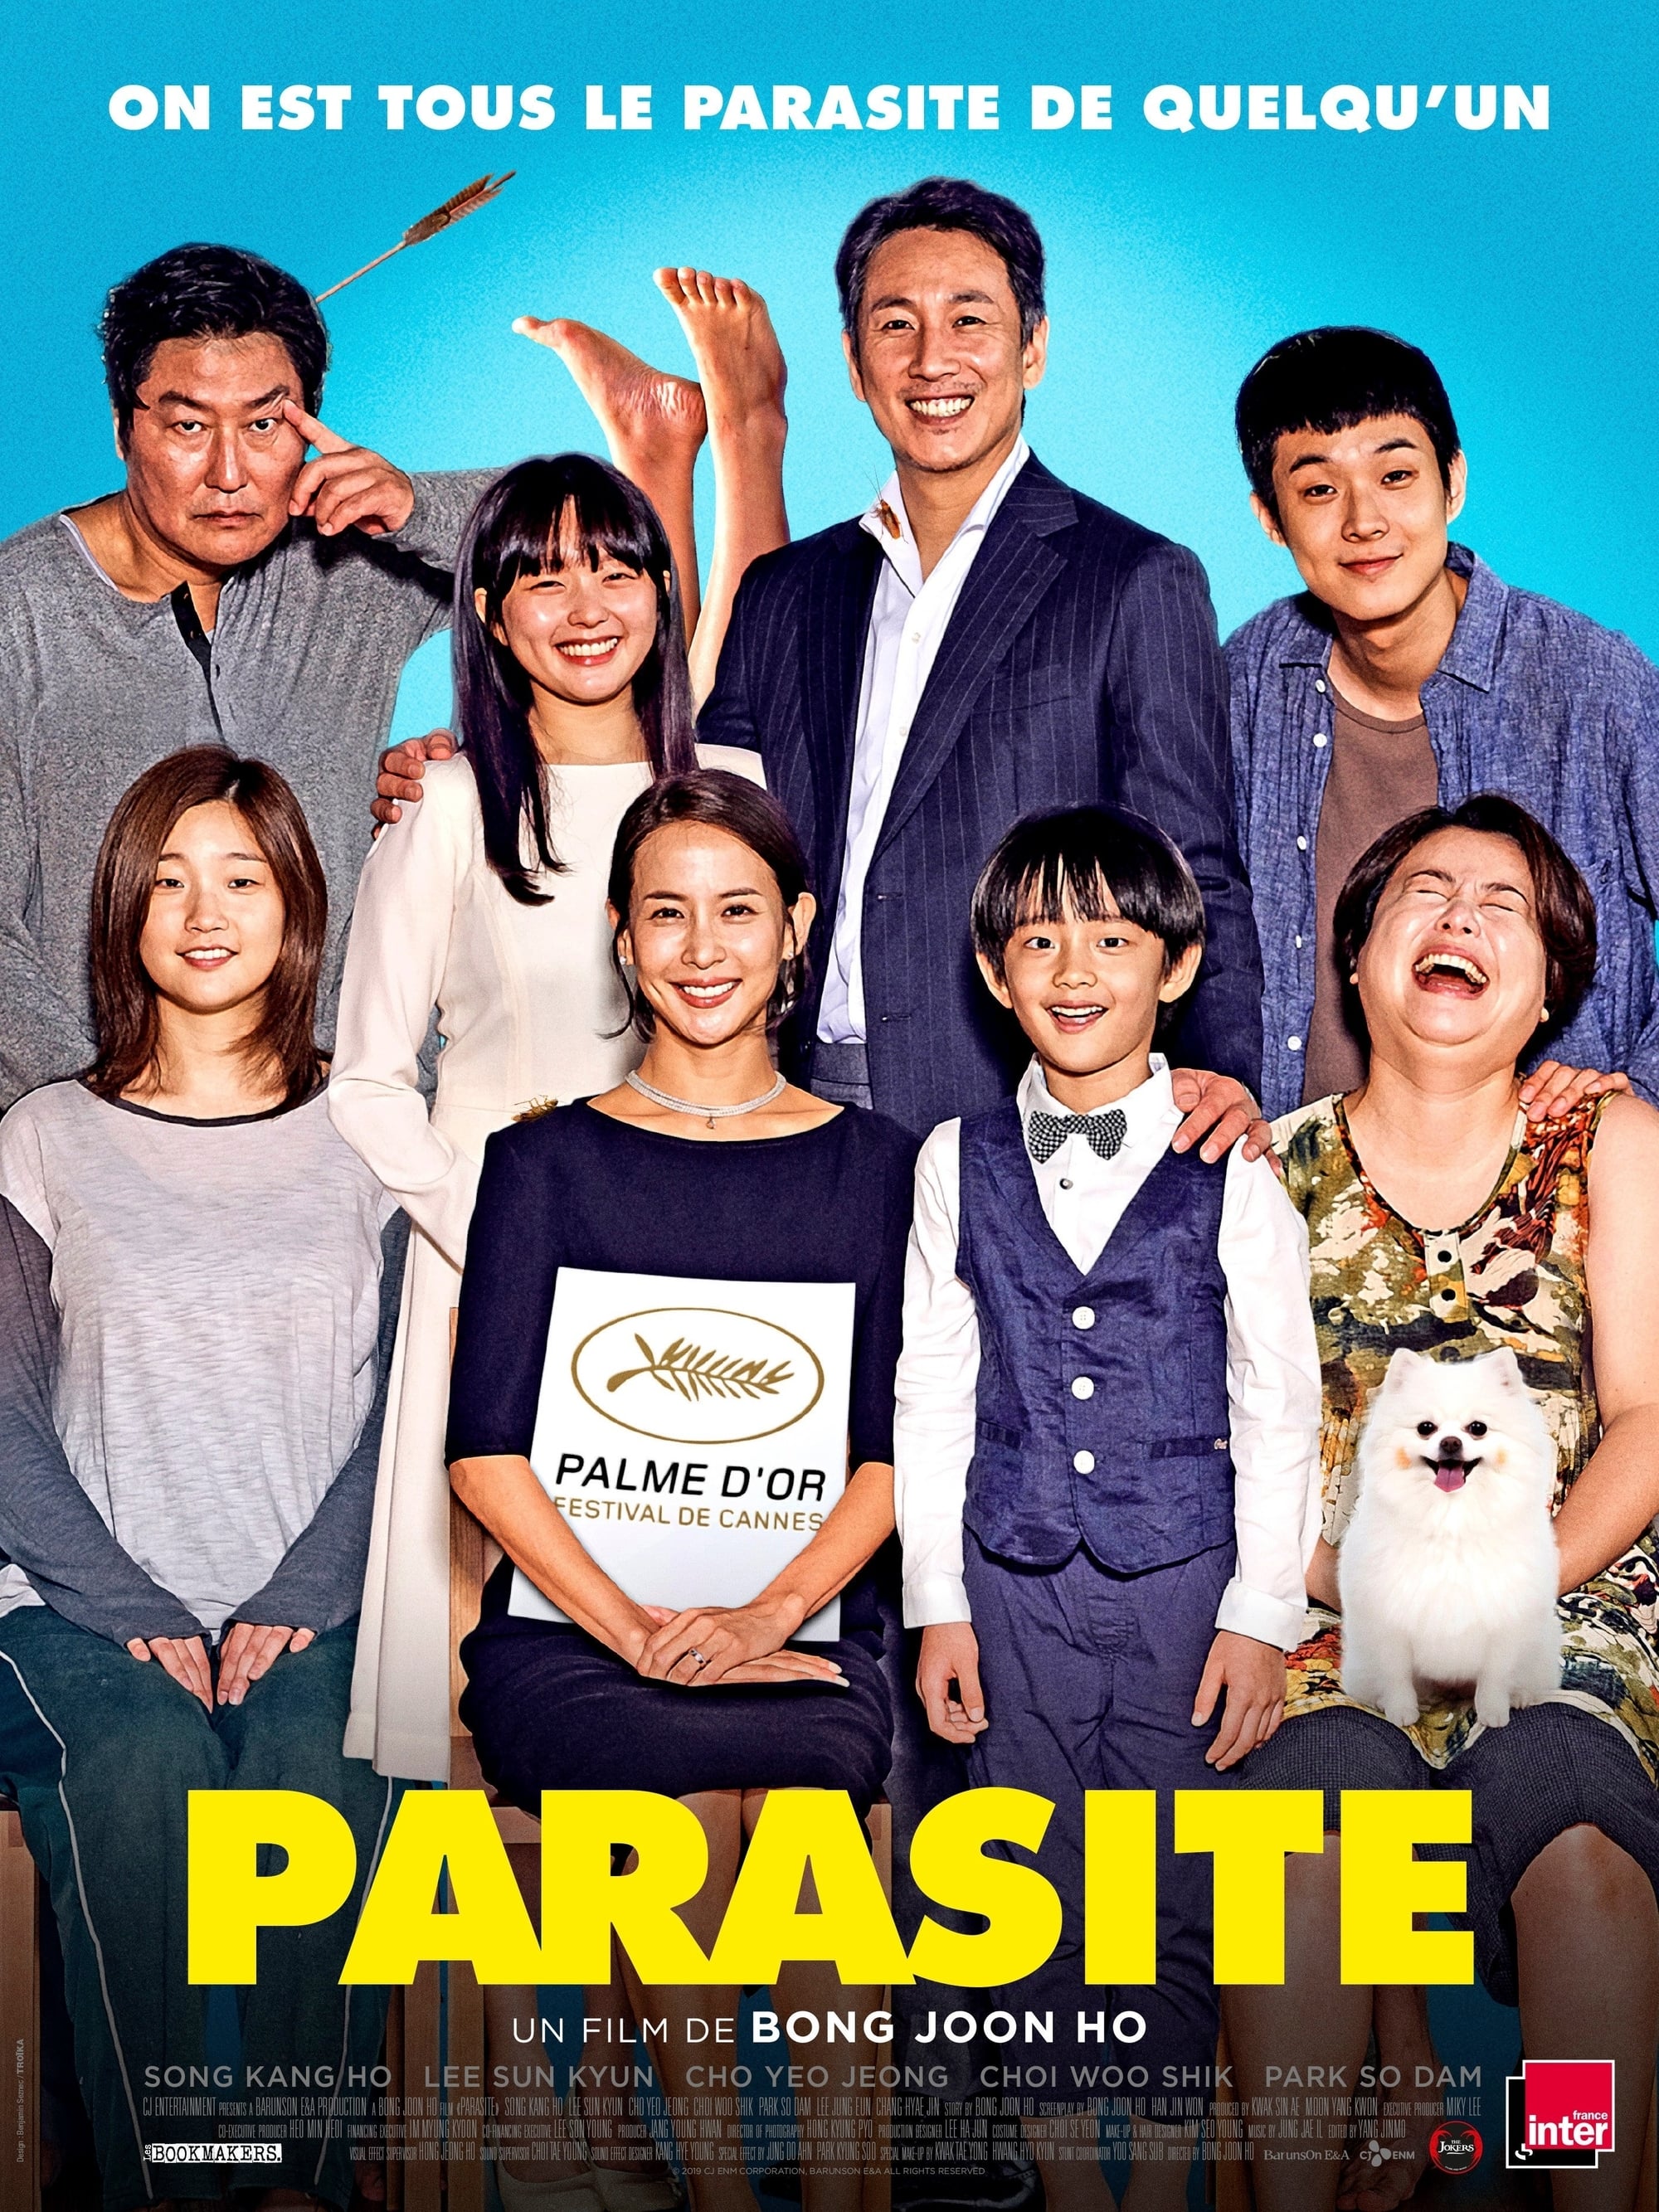 Watch Parasite (2019) Full Movie Online Free - Watch Movies Online HD Quality2000 x 2667